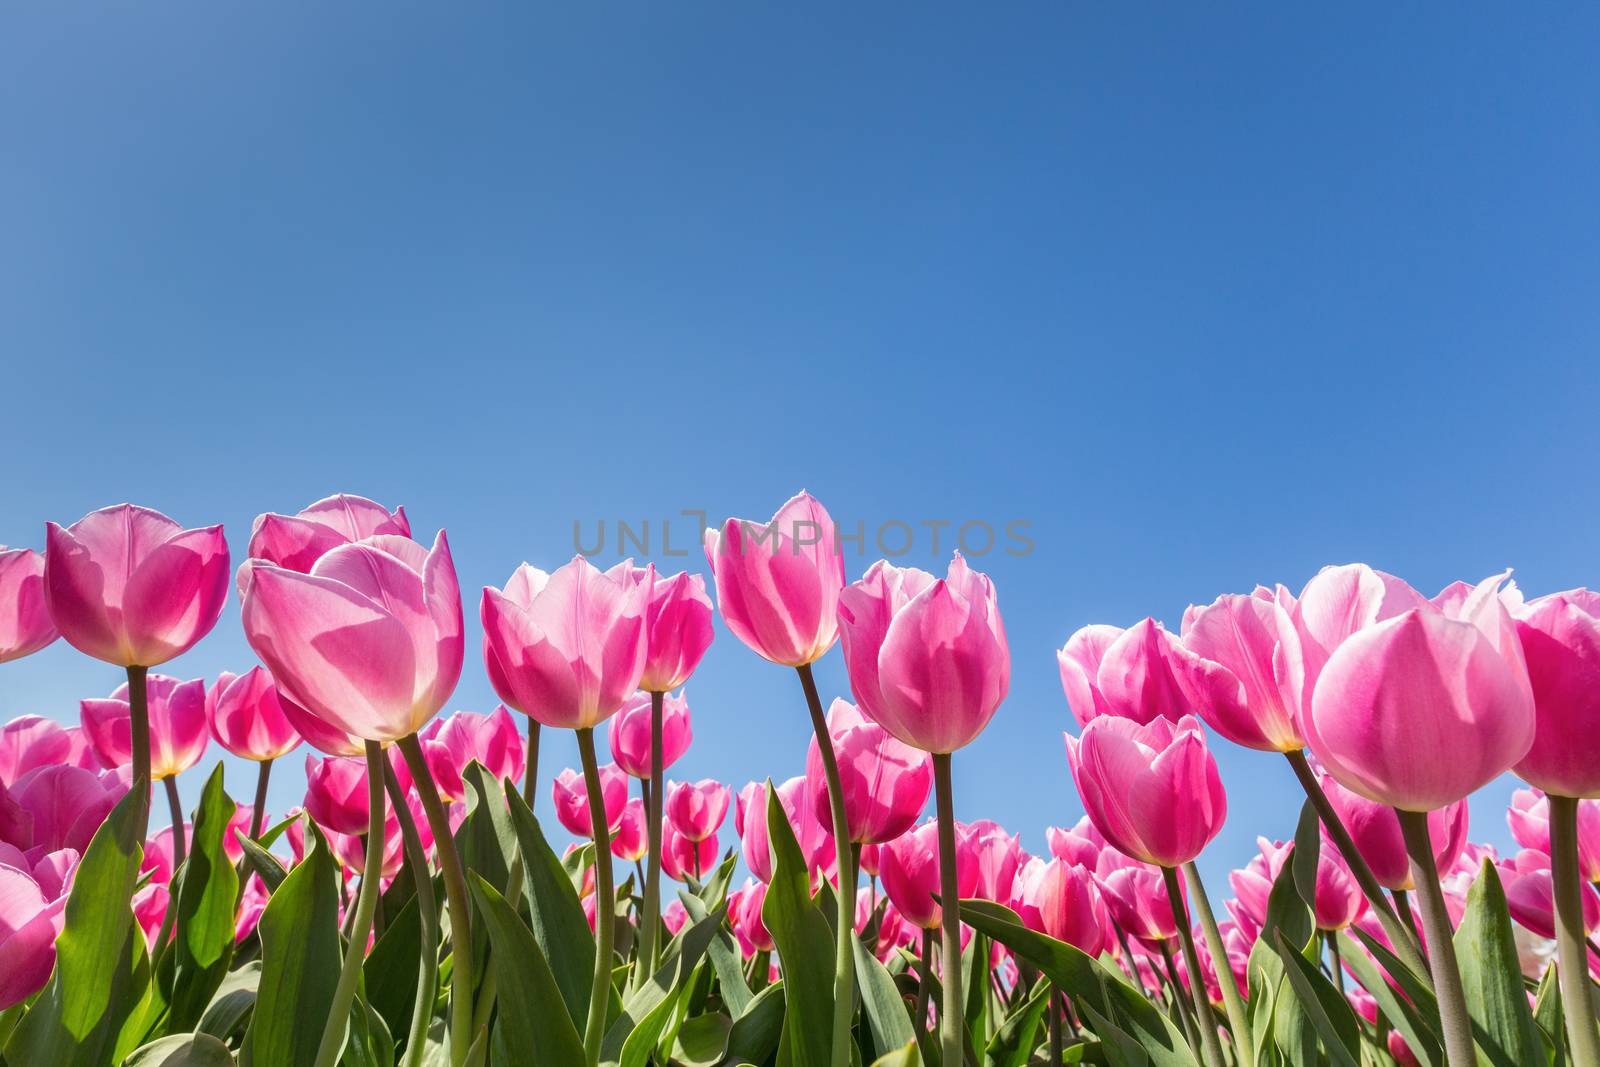 Pink tulips field with blue sky by BenSchonewille